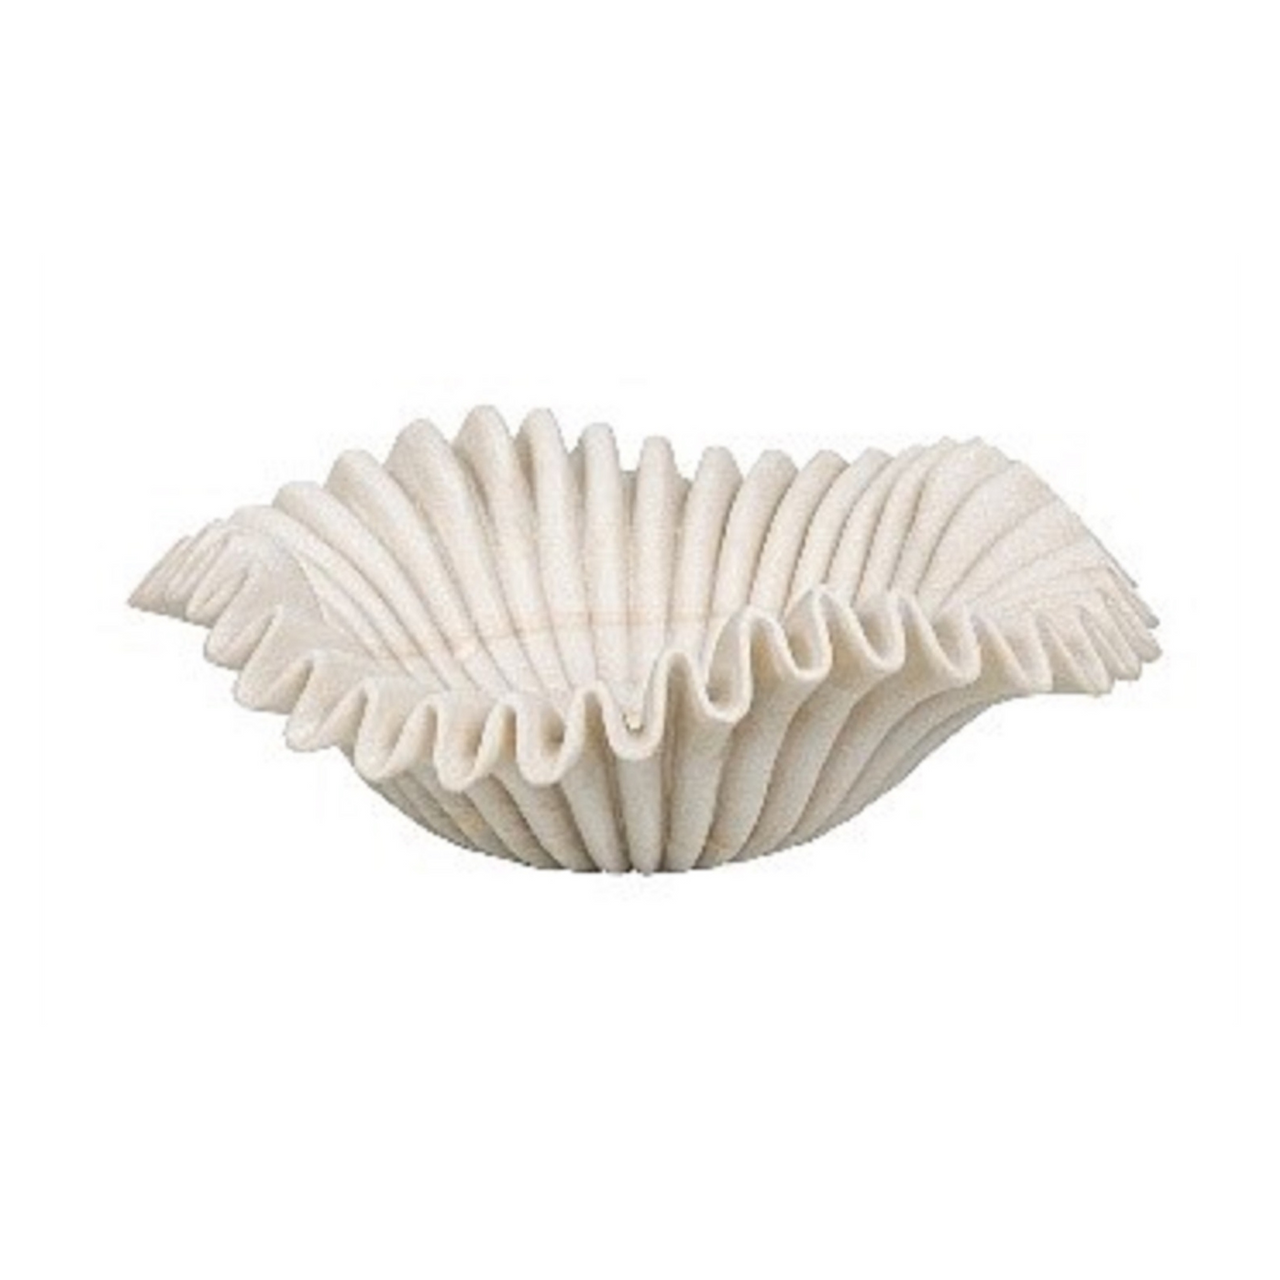 Scallop Marble Bowl